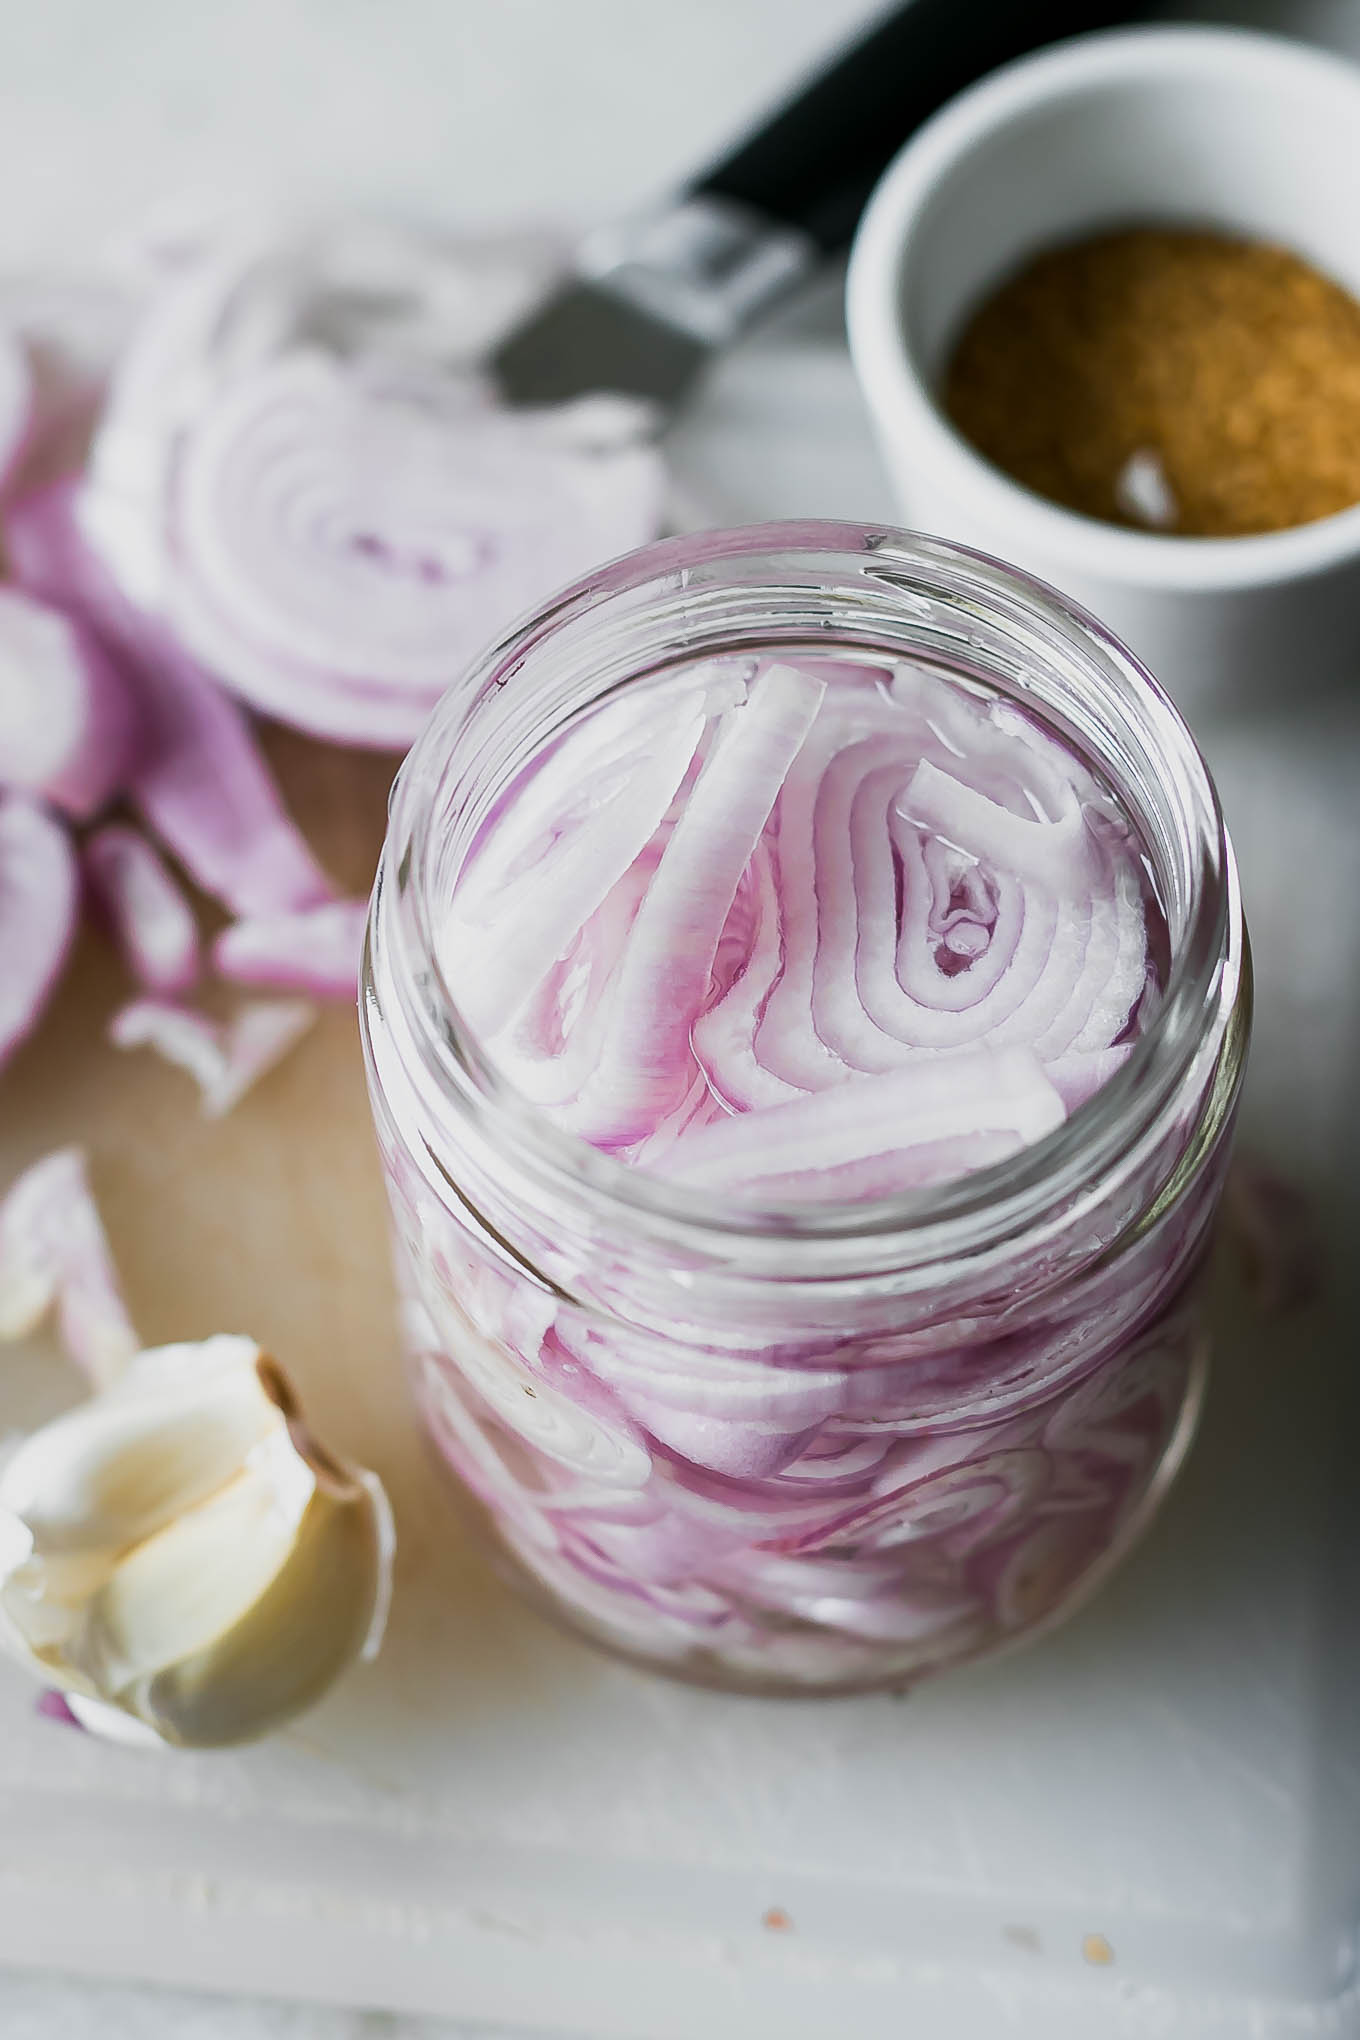 sliced shallots in pickling brine in a jar on a white table